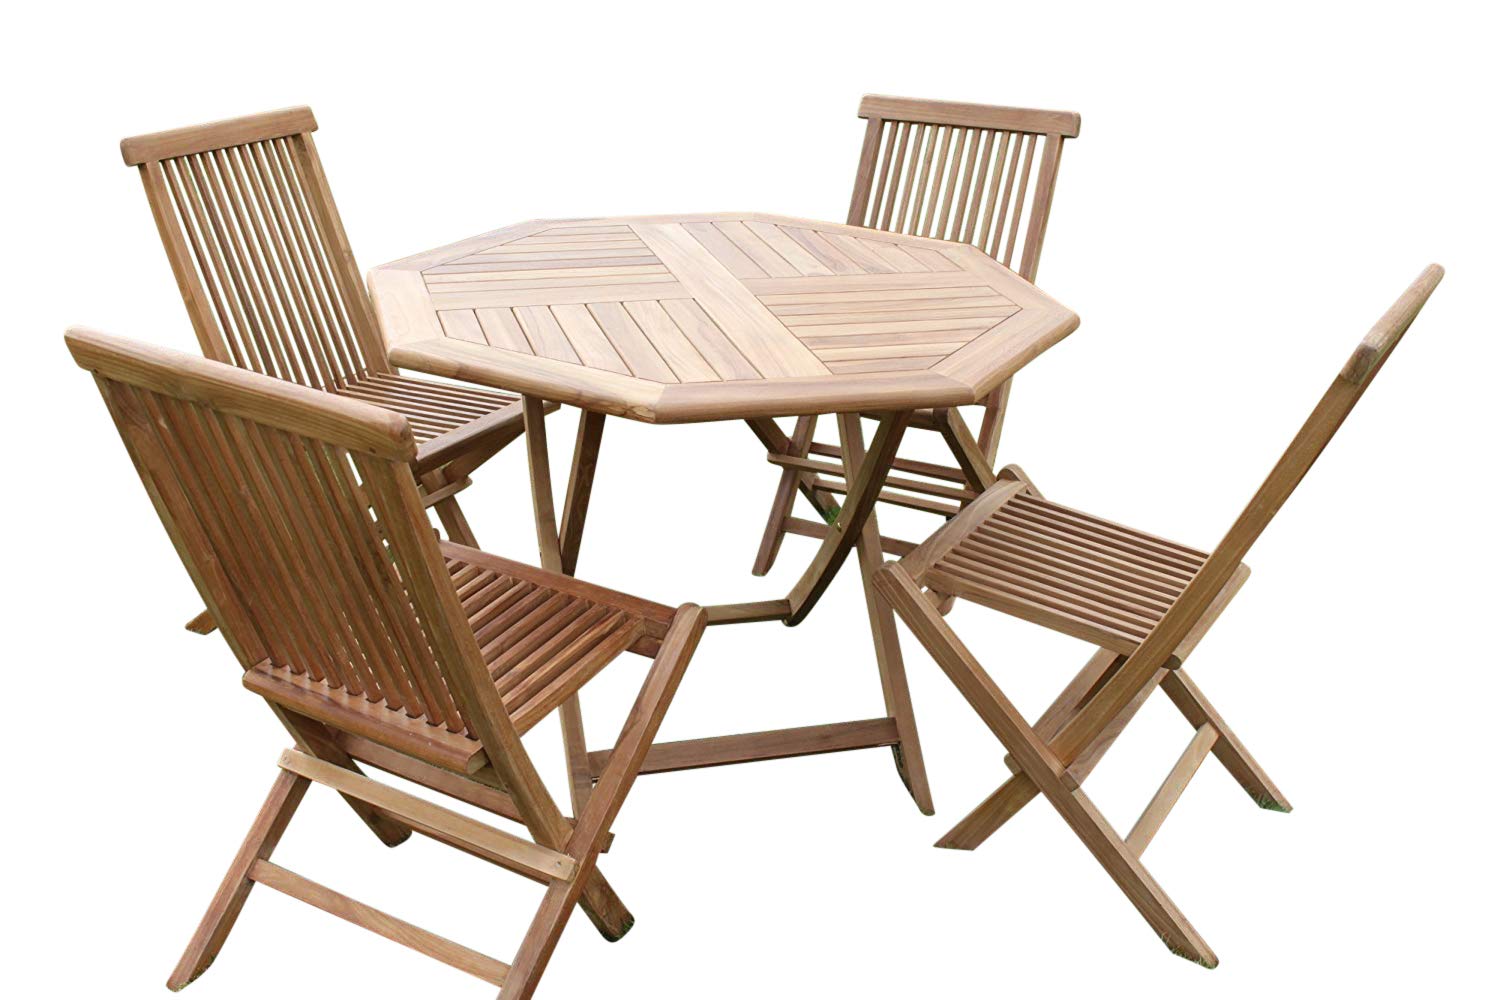 Solid Teak Octagonal Garden Dining, Wooden Folding Table And Chairs For Garden